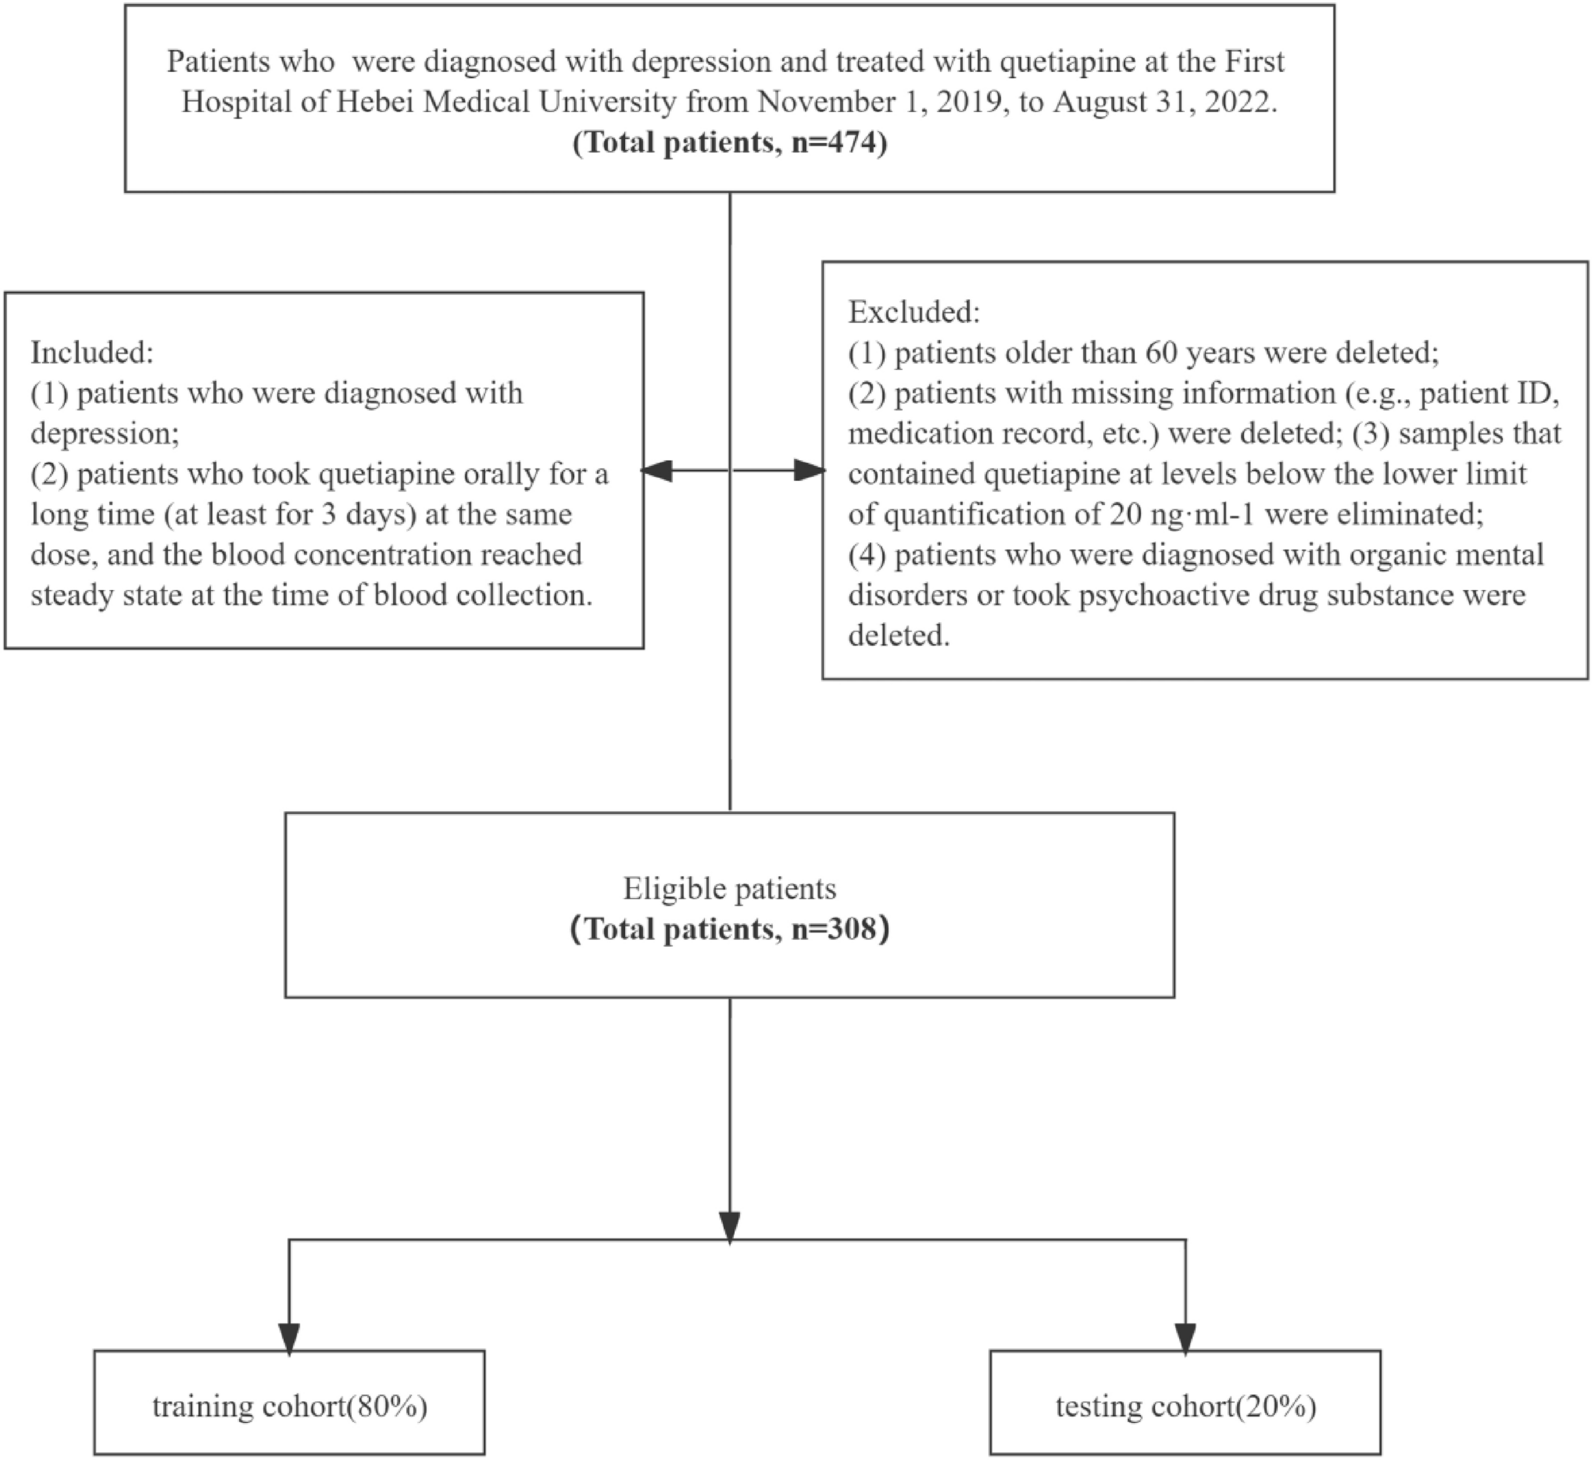 Predicting quetiapine dose in patients with depression using machine learning techniques based on real-world evidence